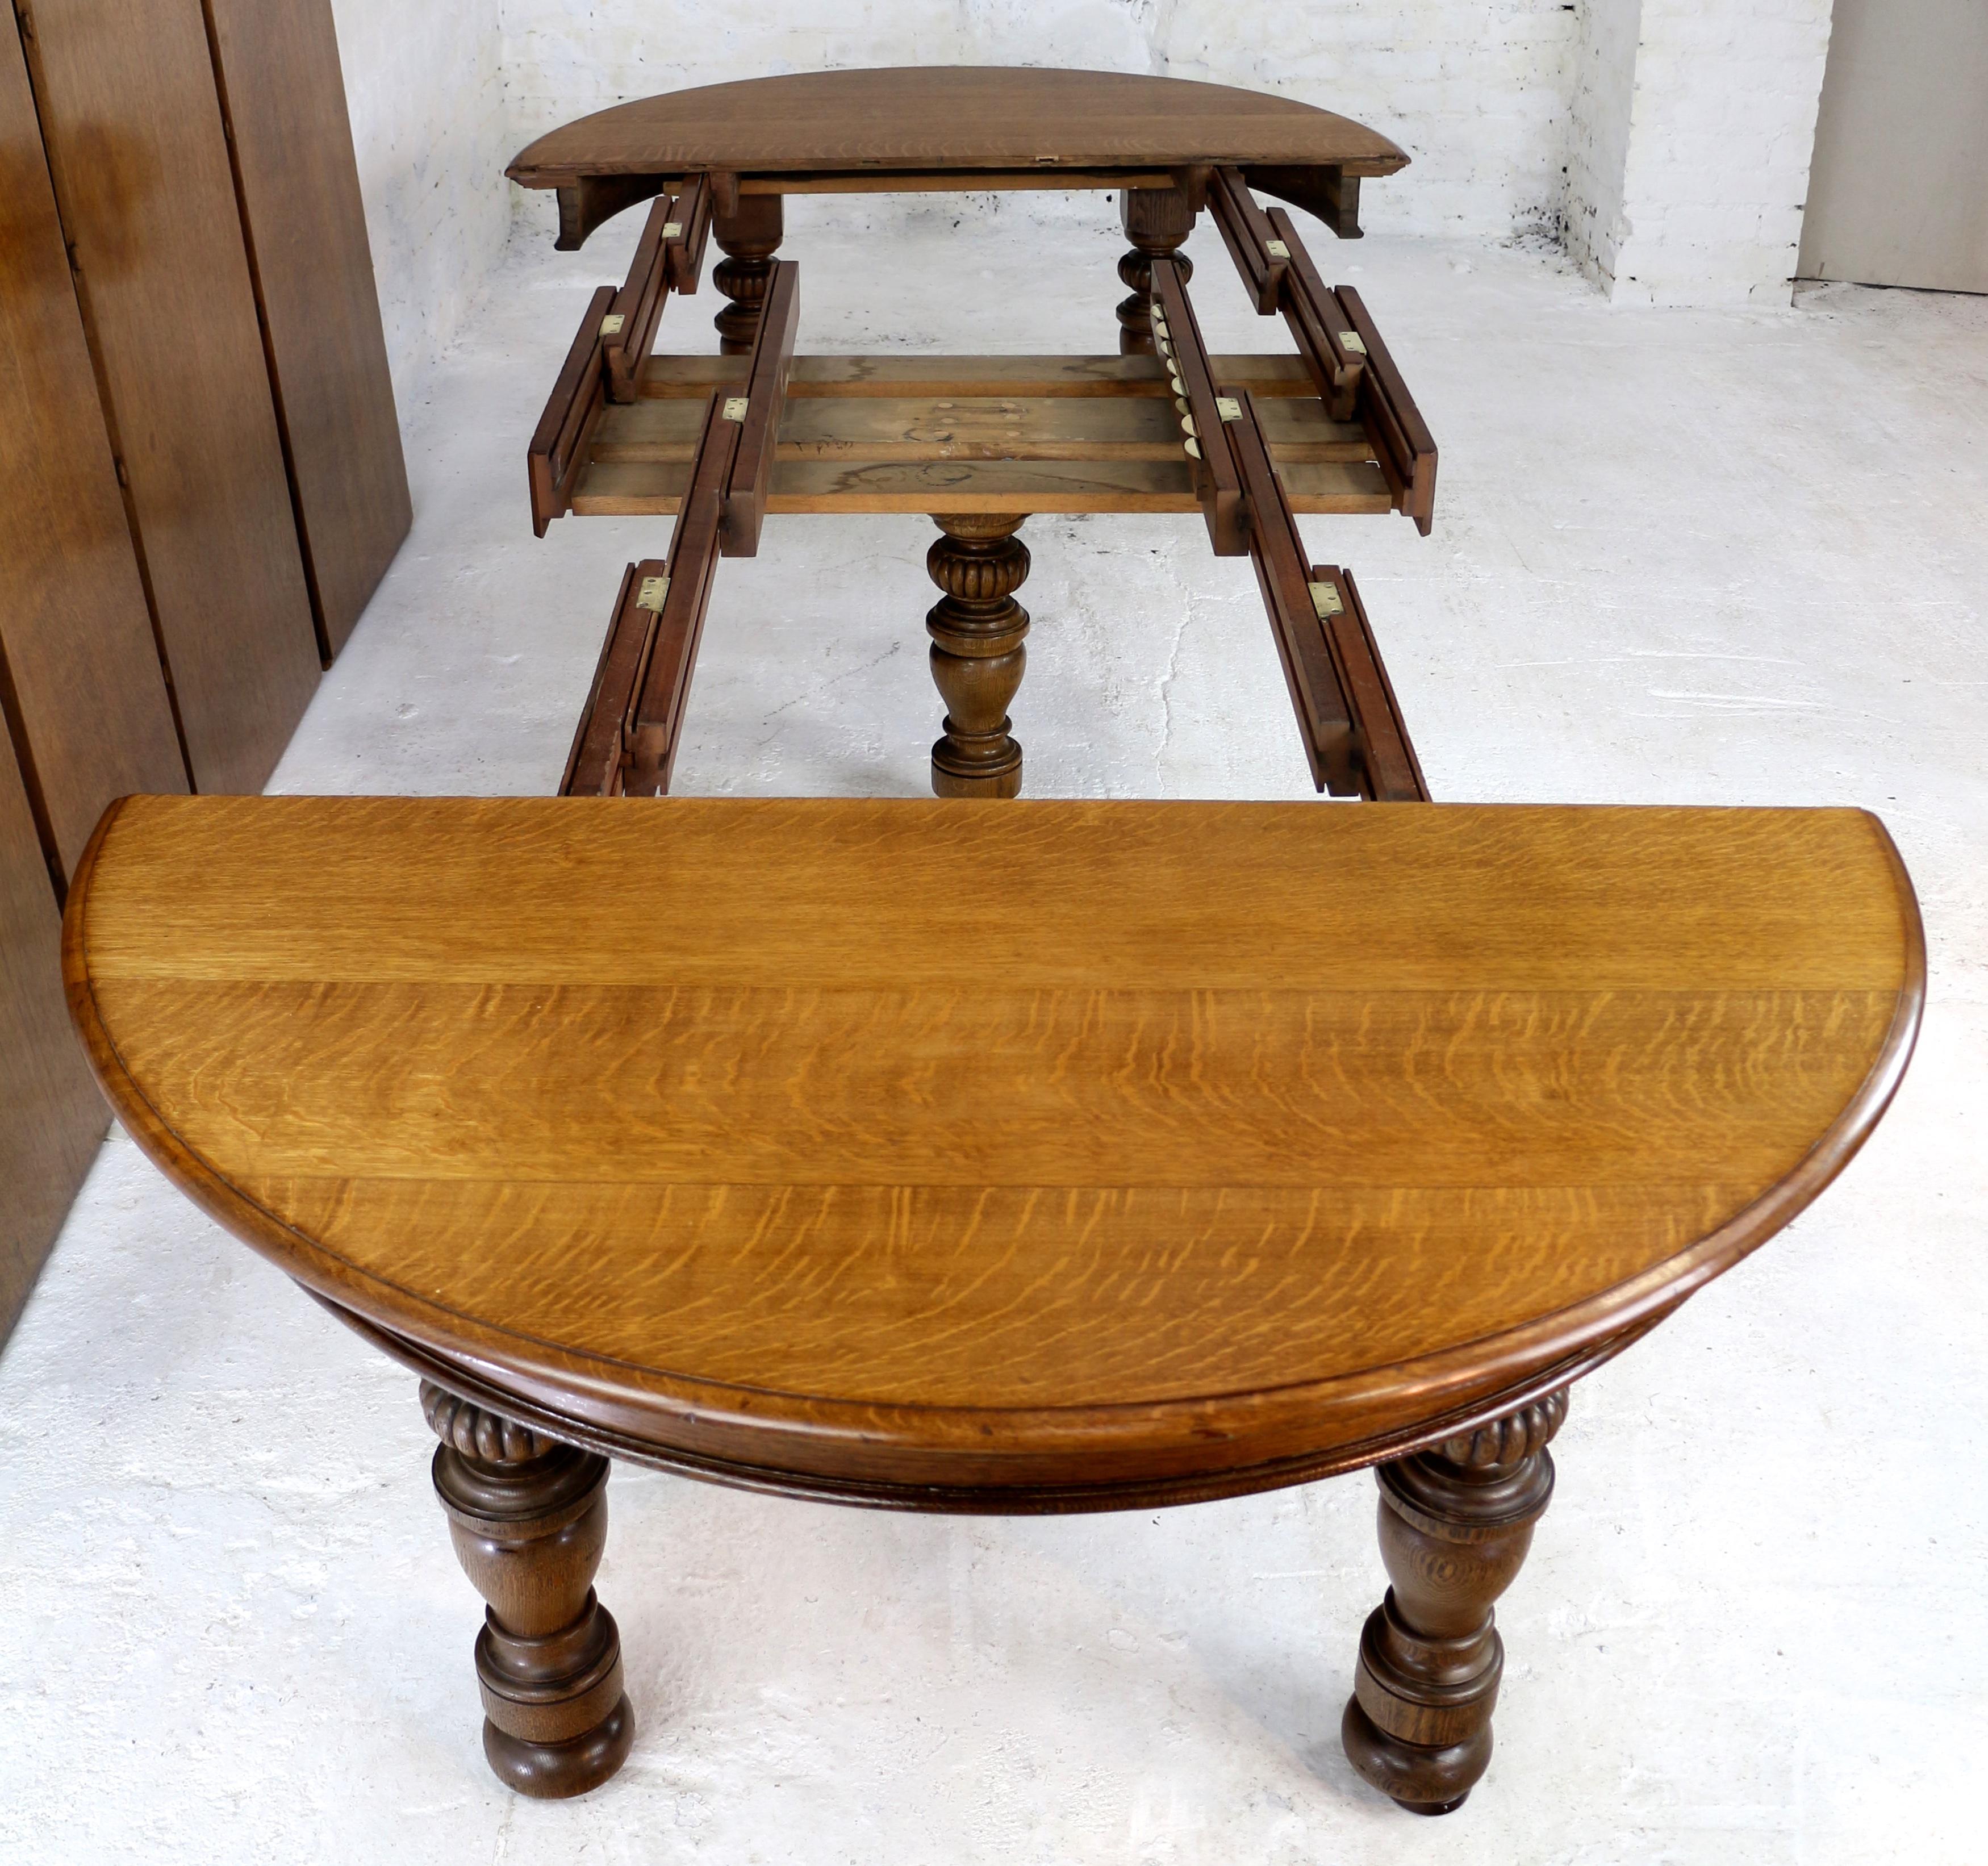 19th Century Antique English Victorian Oak Round Extending Dining Table and 4 Leaves